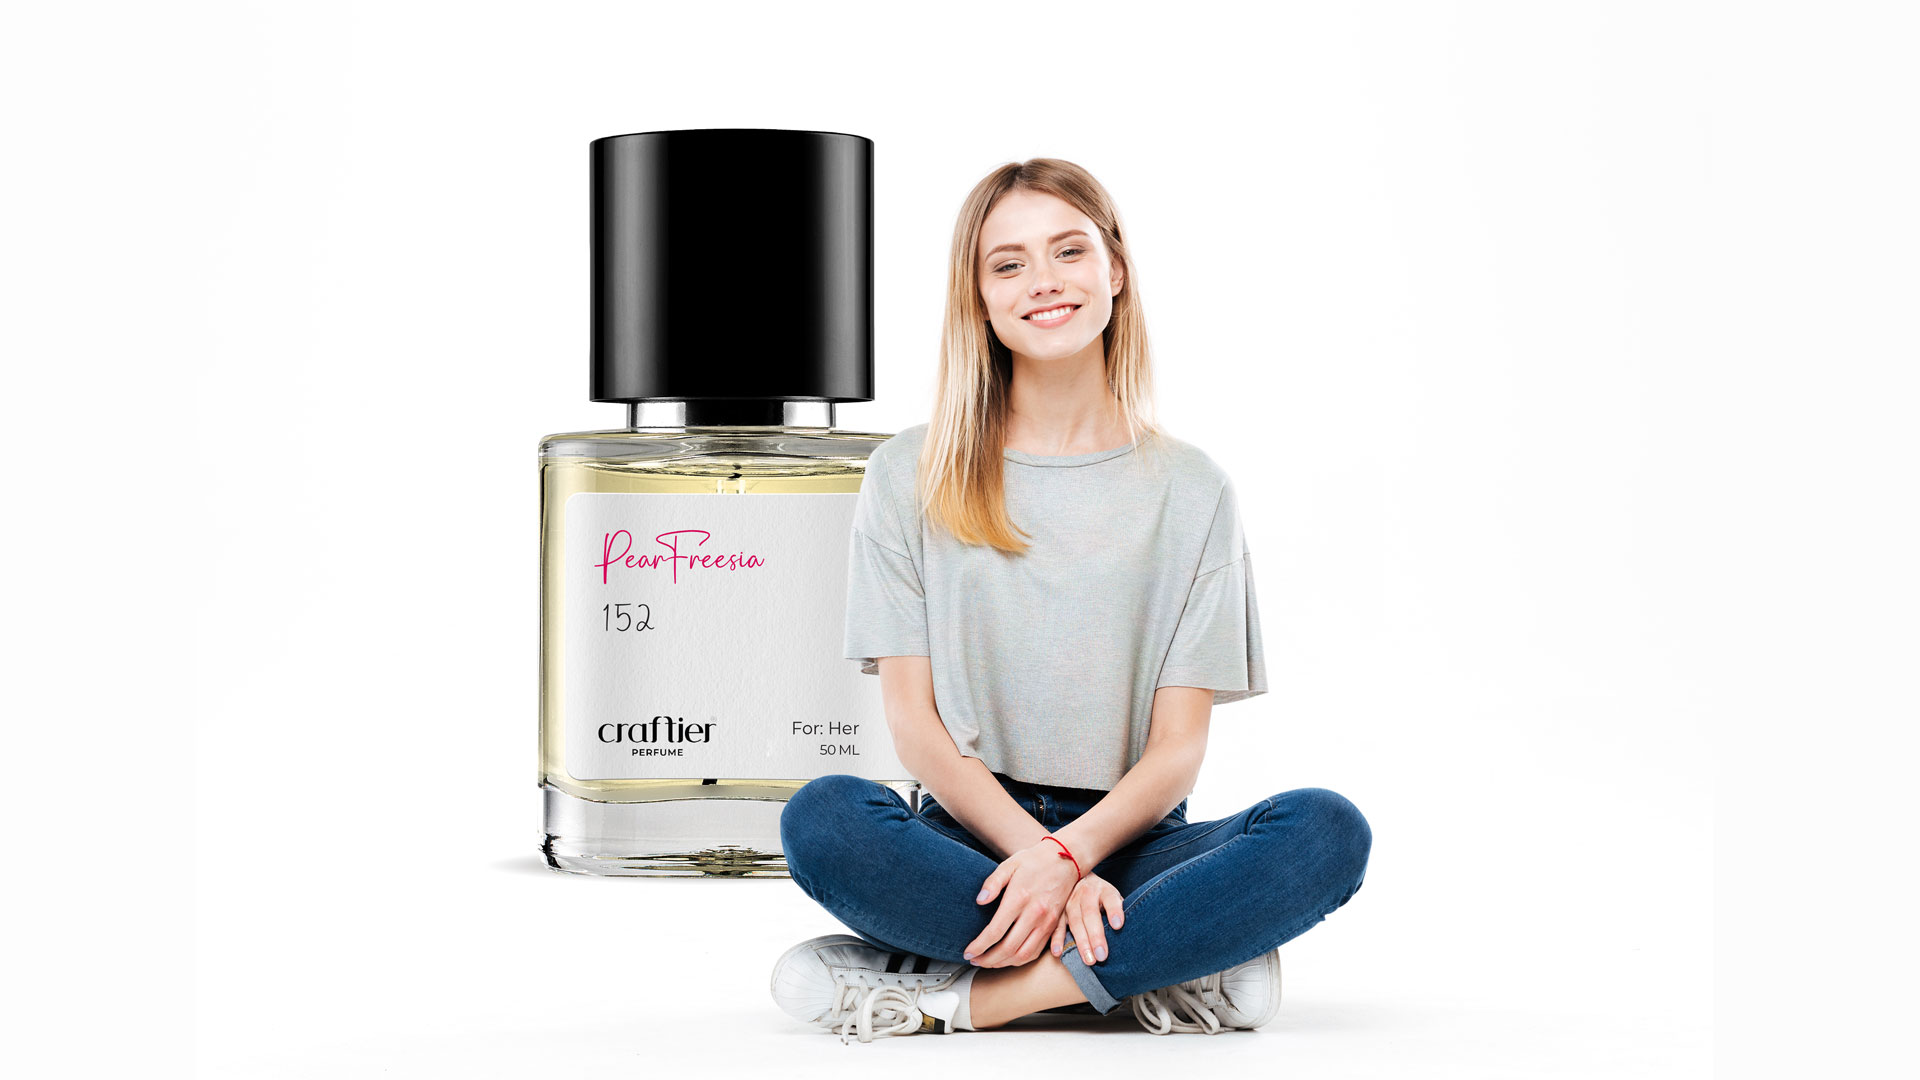 Uplift Your Mood with Premium Women's Fragrances: First-Copy Jo Malone Women's Perfumes​